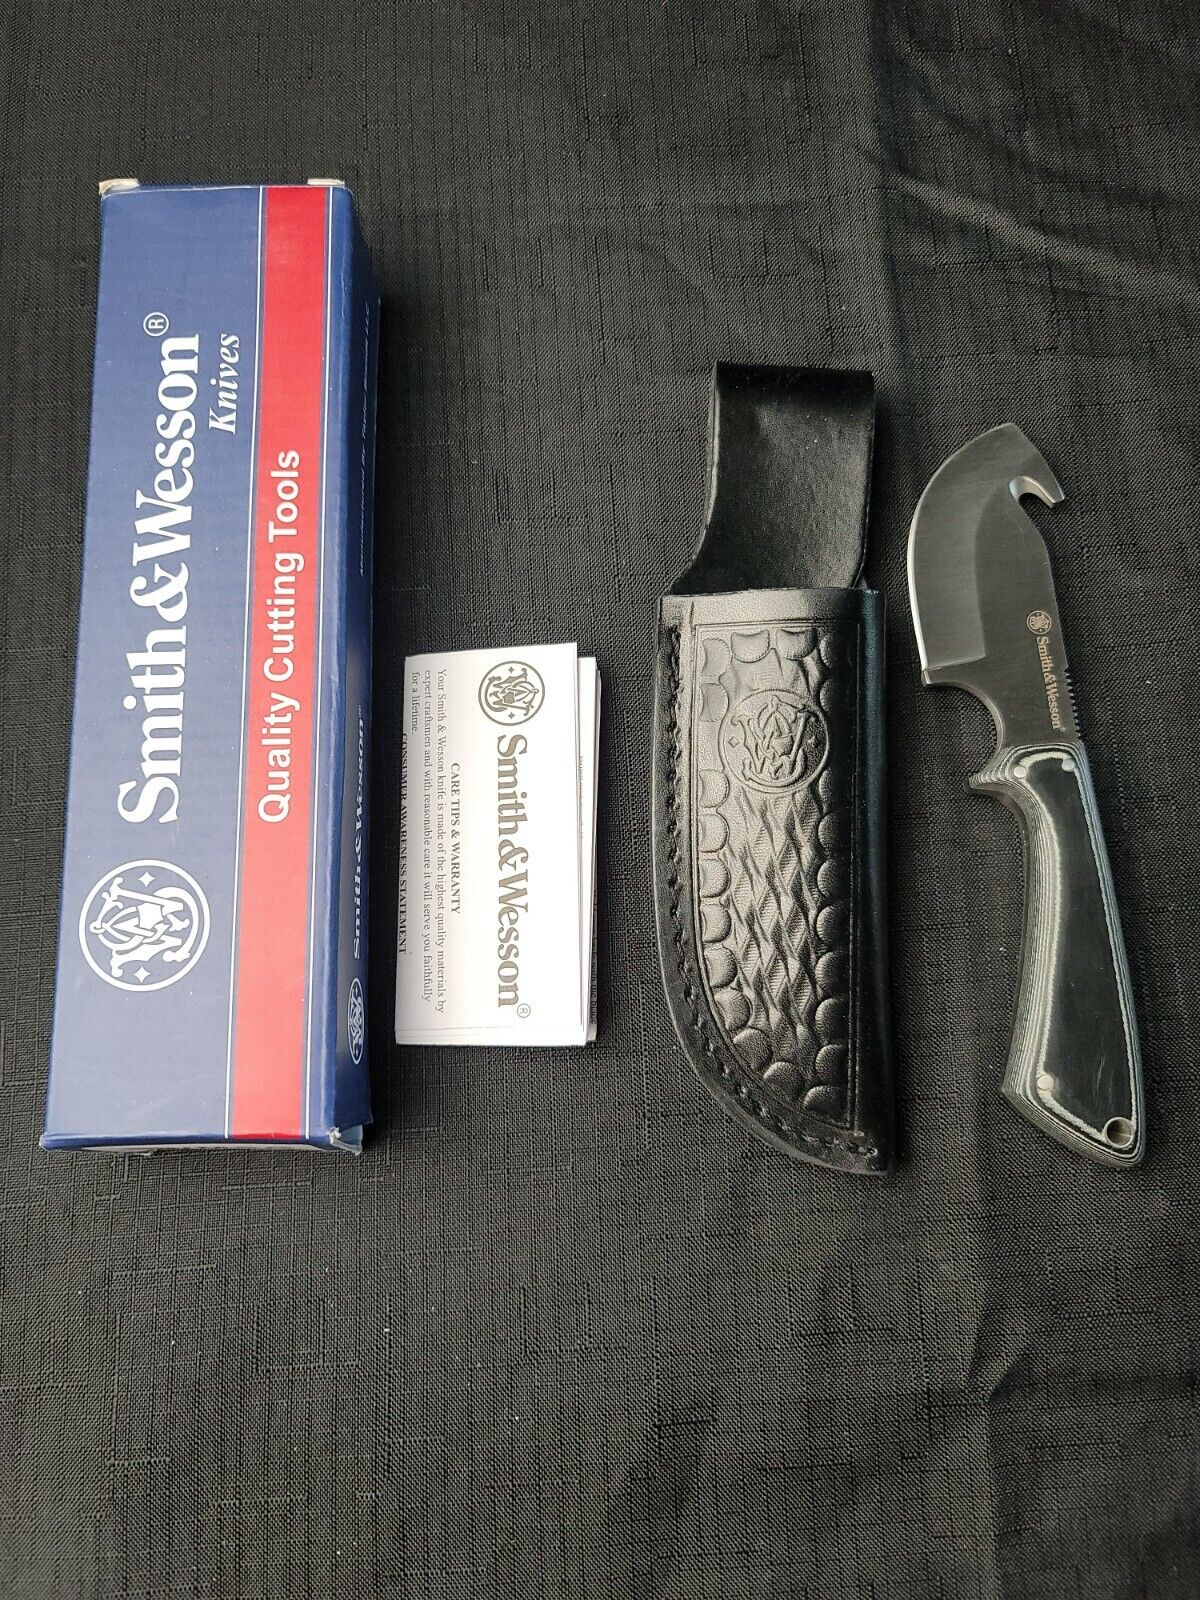 Smith & Wesson SWMSG Micarta Hunting Skinner w/ Guthook Gut Hook Sheath in Box